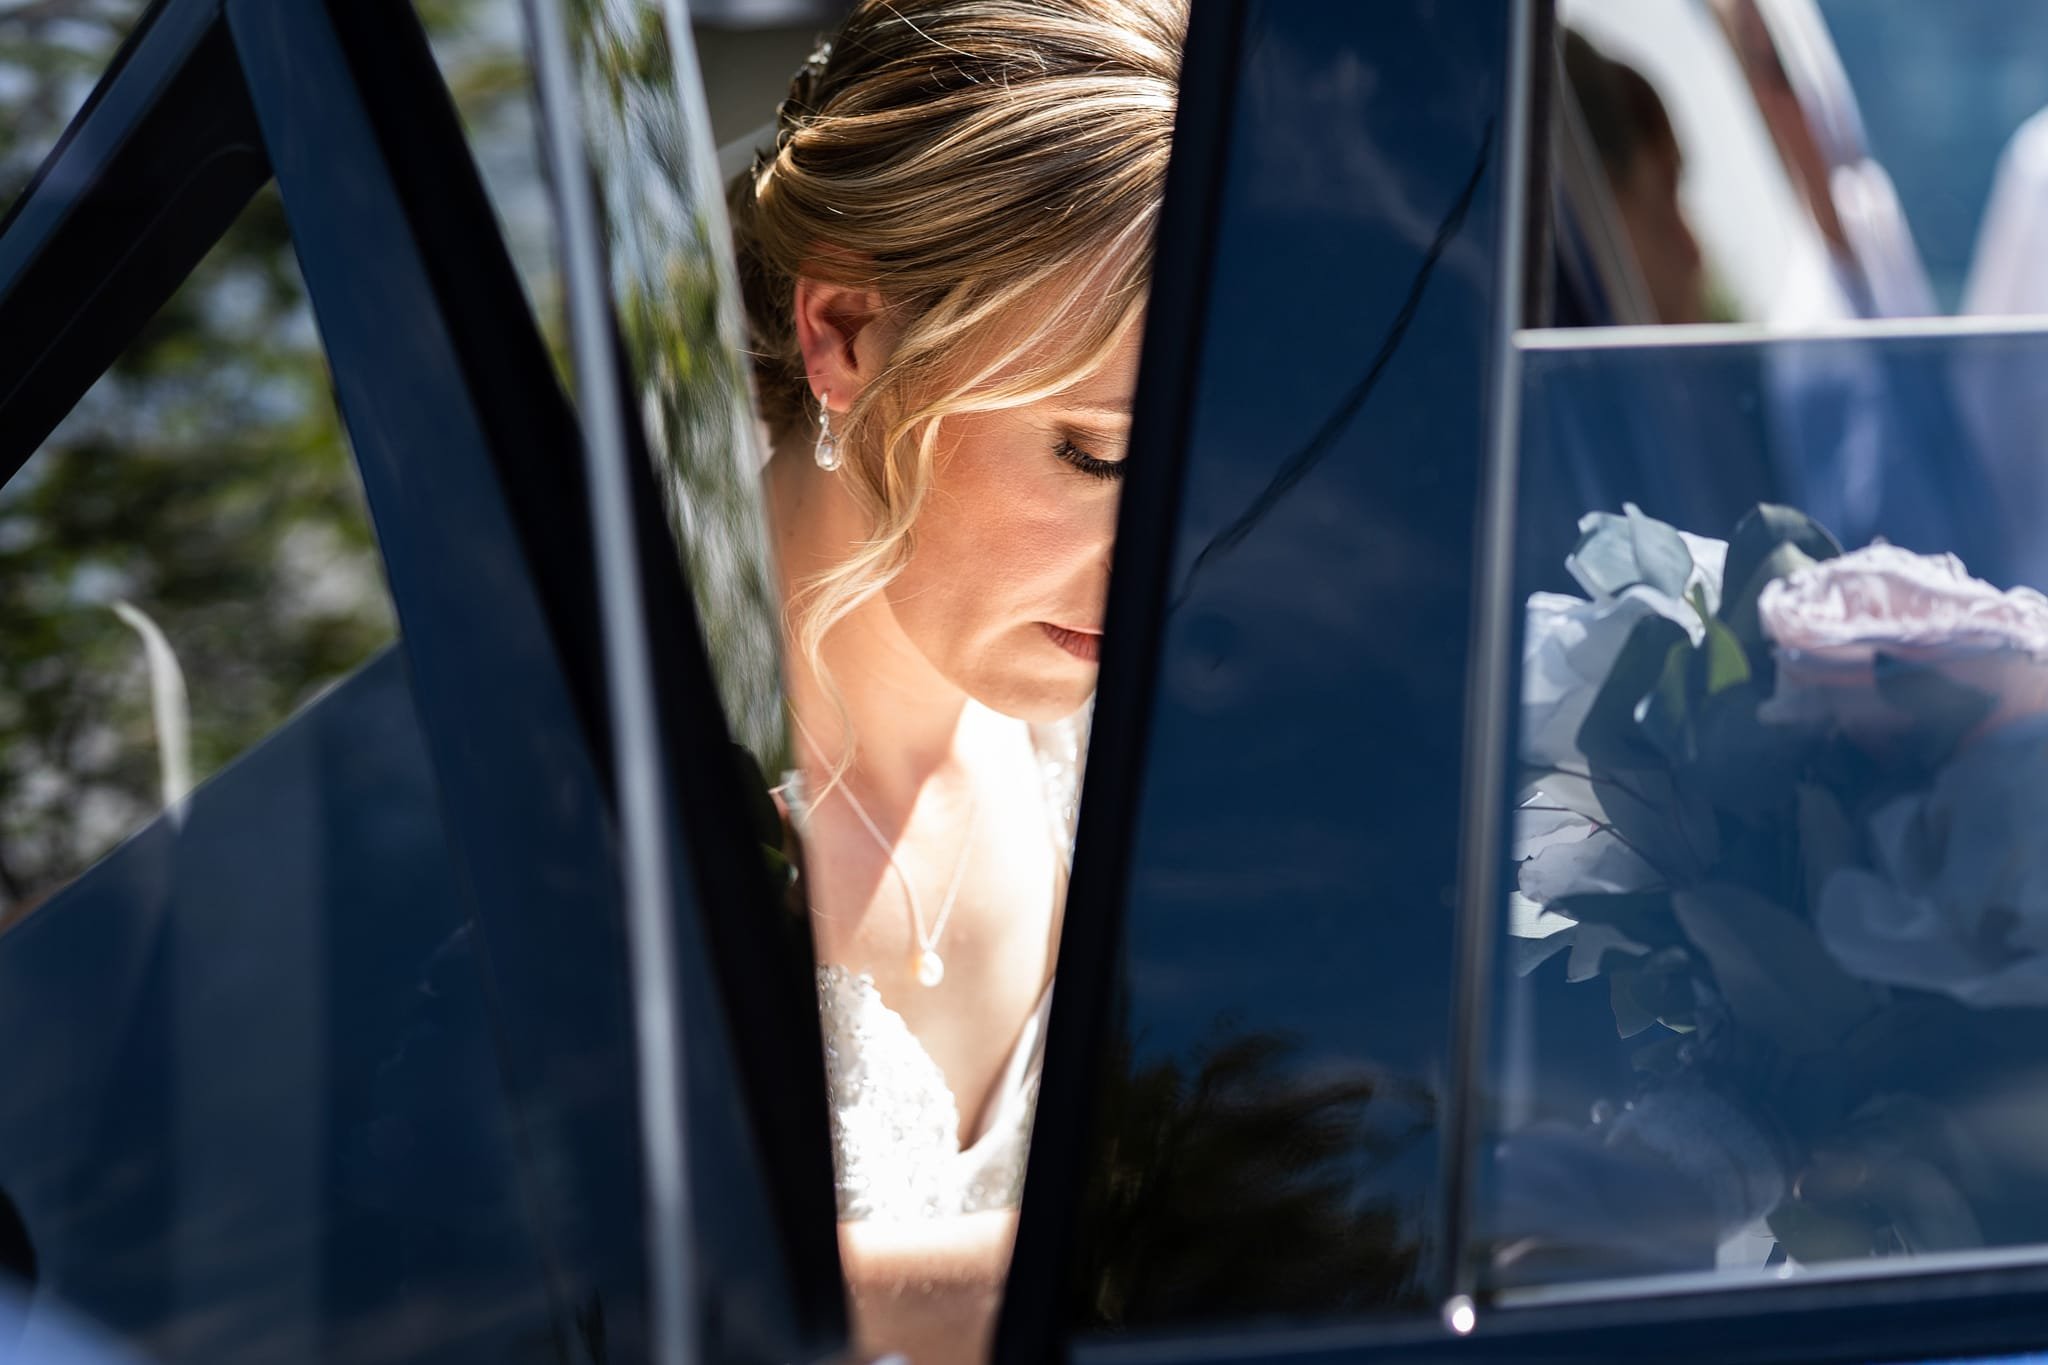 Bride's face getting gout of car